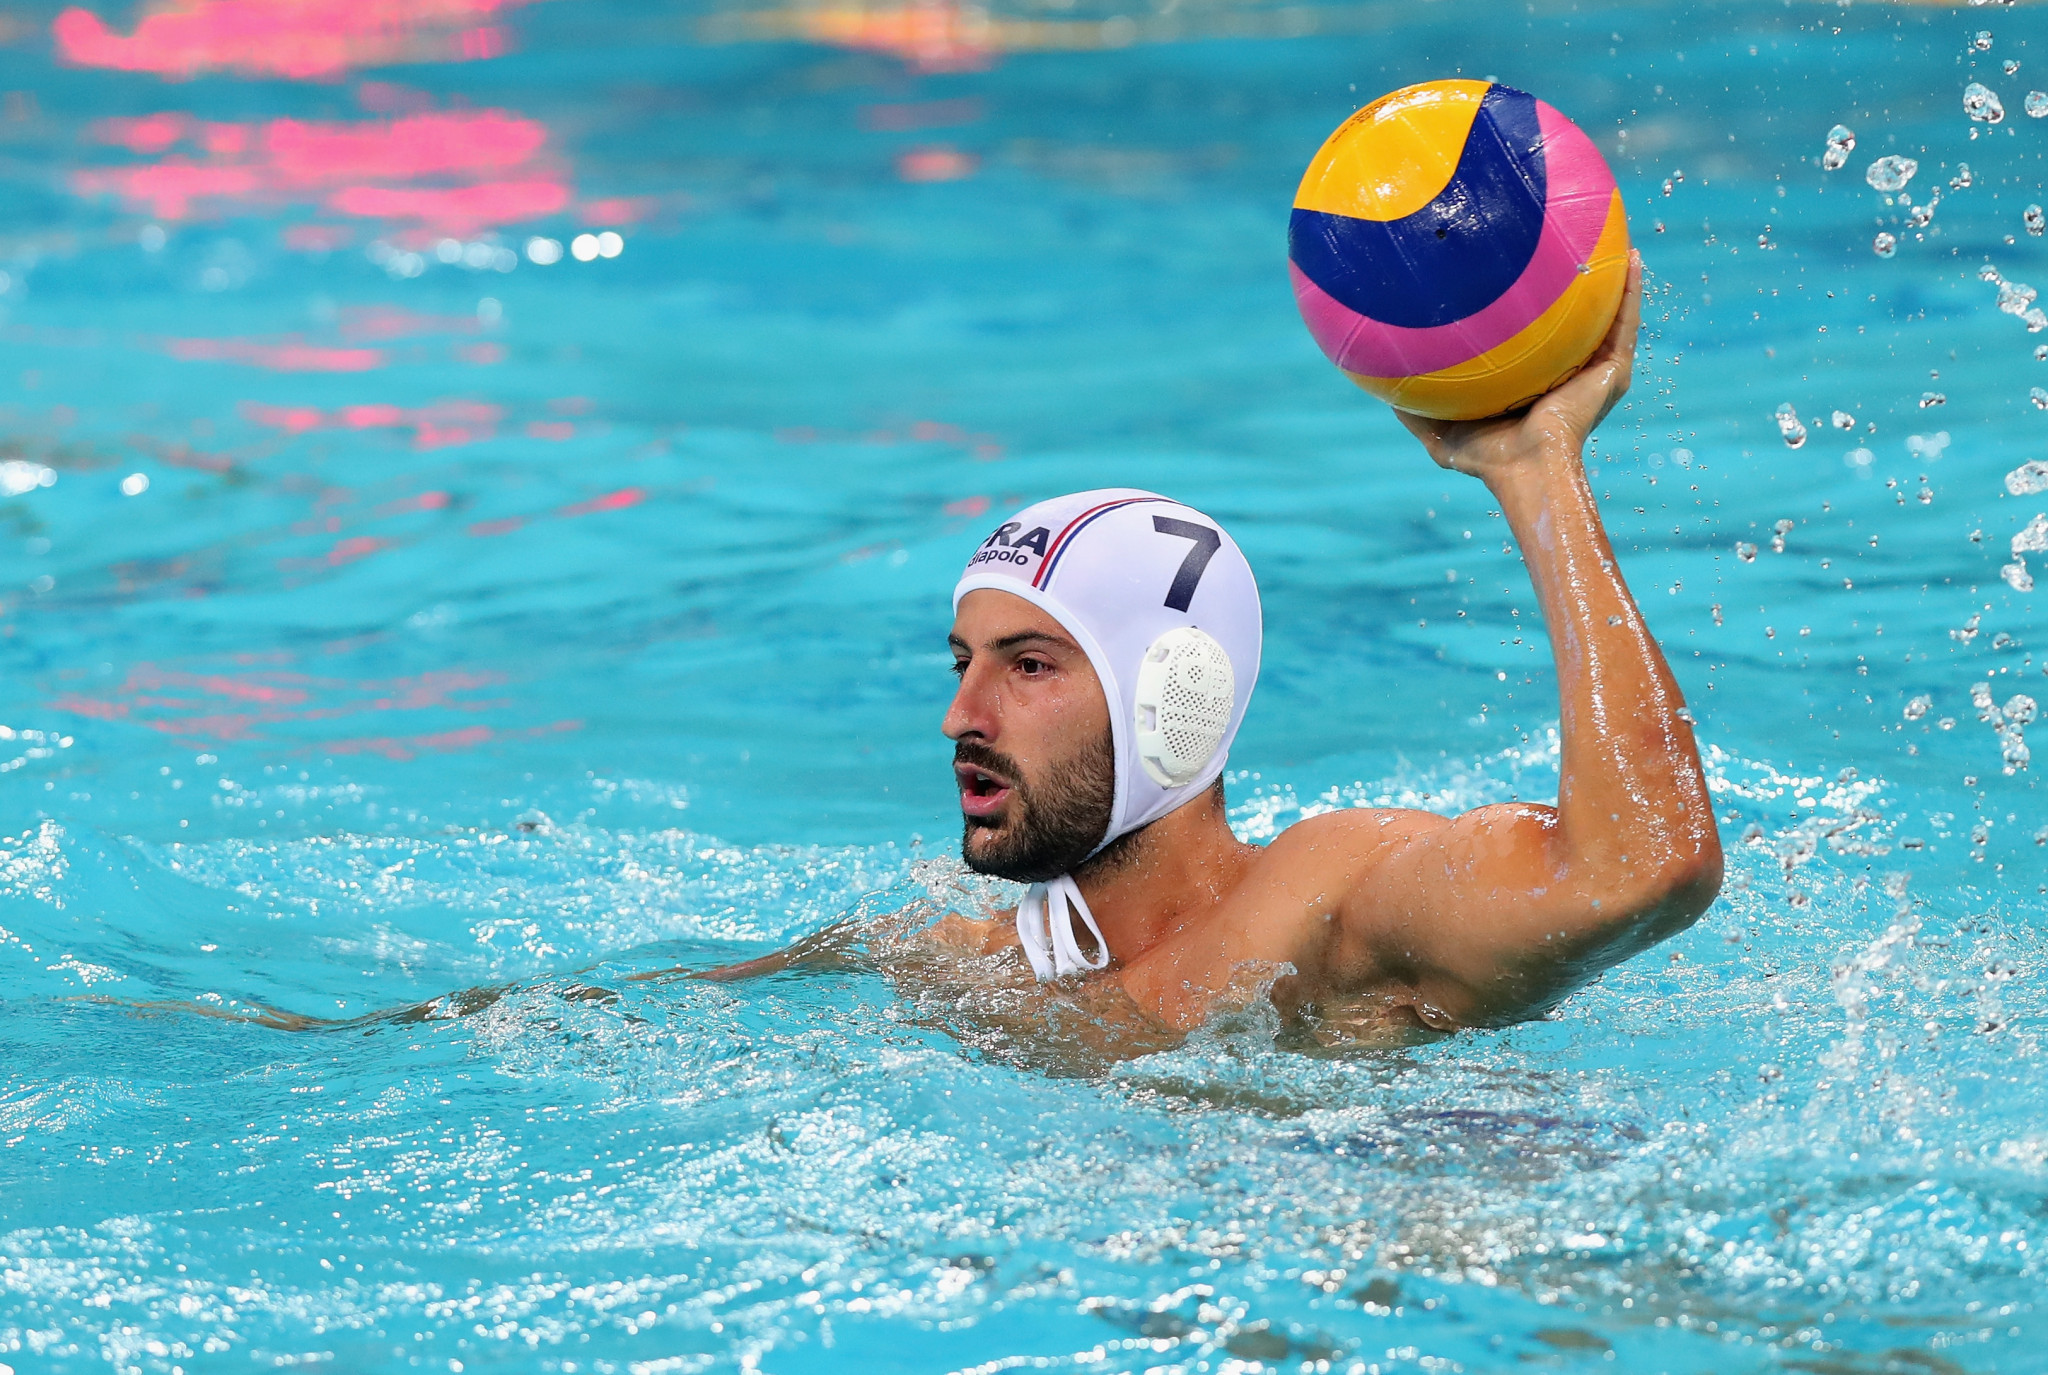 Ugo Crousillat scored four times to help France shock Serbia in the Men's European Water Polo Championship playoffs ©Getty Images